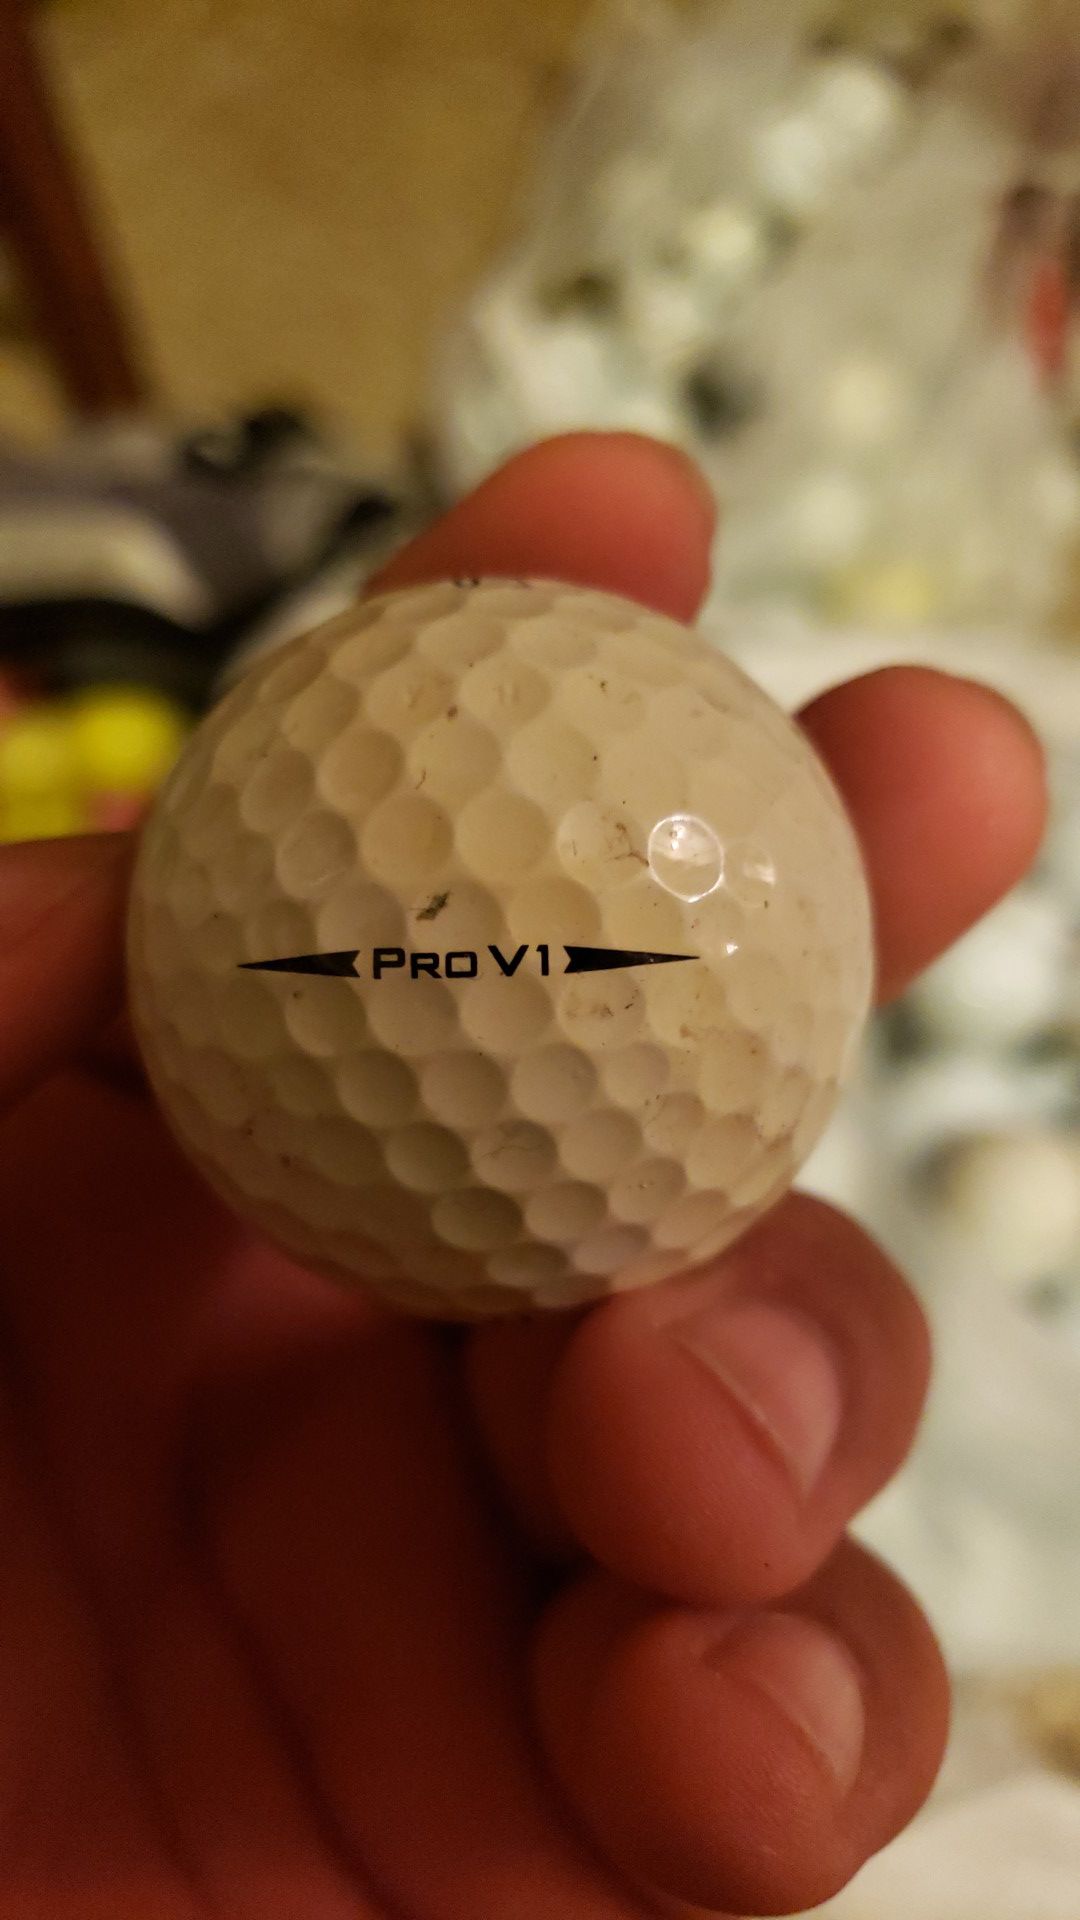 Golf balls pro v1 titleist used 100 for 60 and if you want you can select them